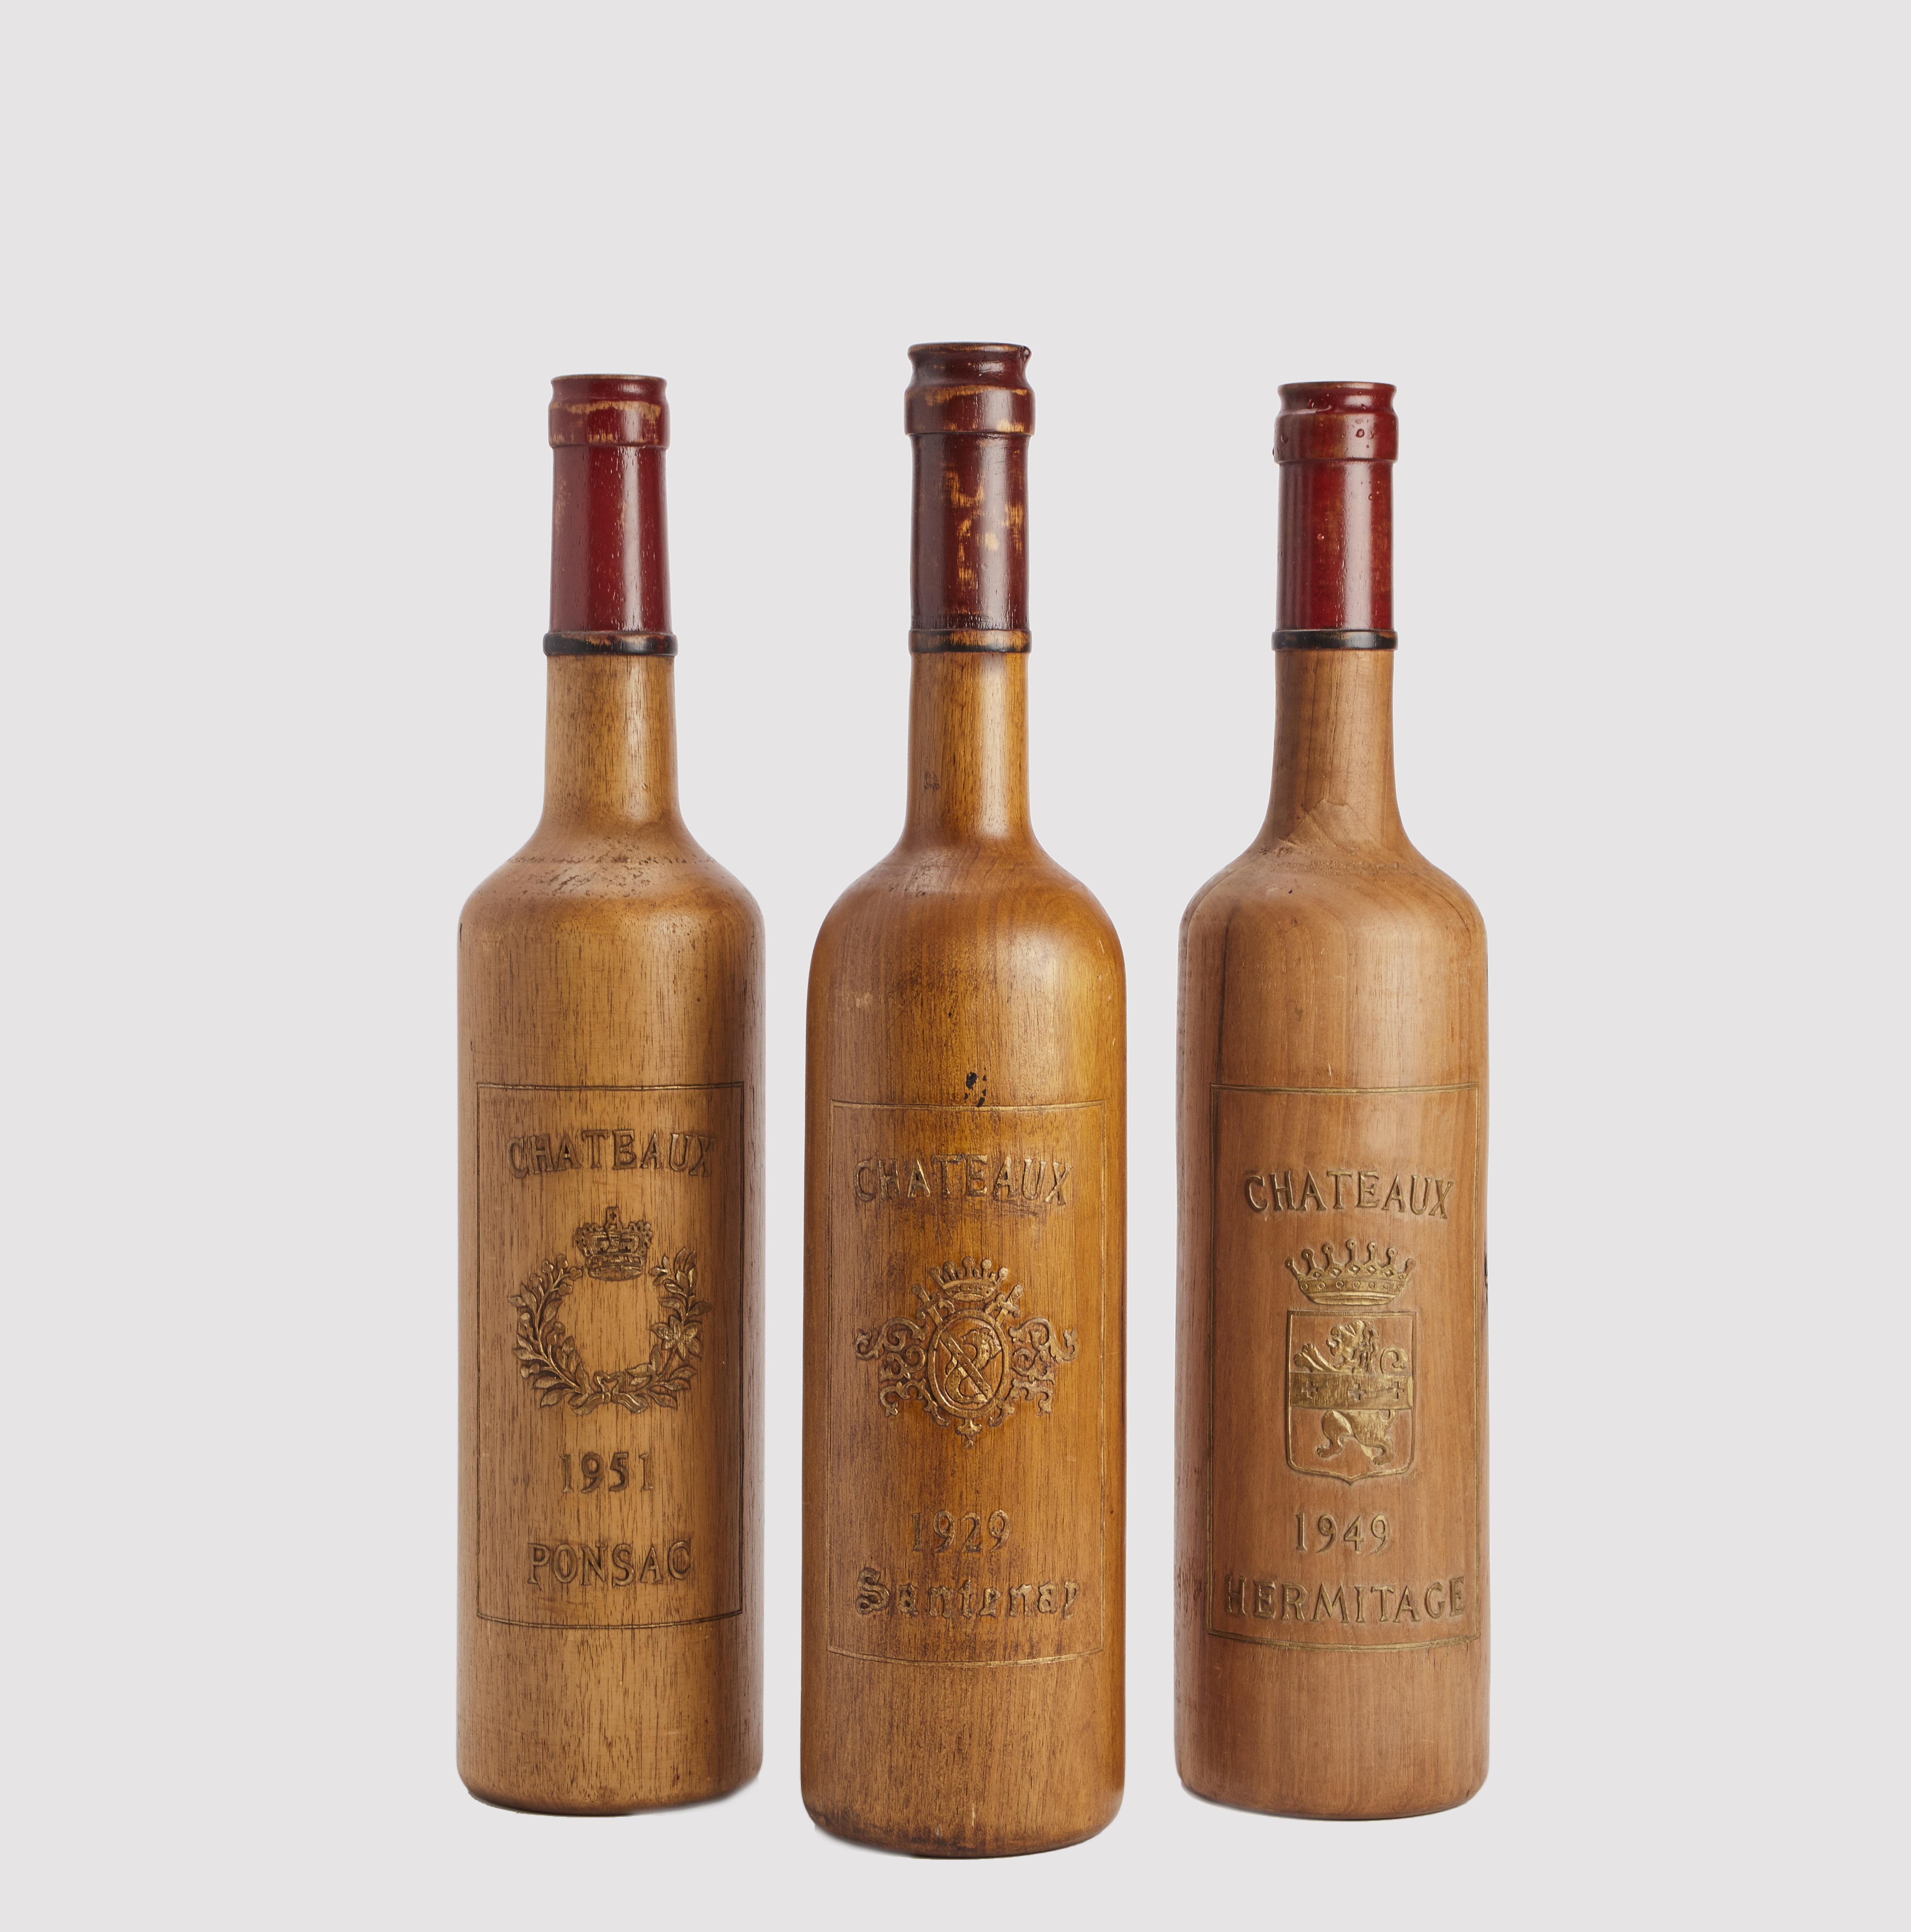 A trade sign for the window of a wine shop, depicting three bottles with the label of French wines: Chateau Santenay, Chateau Ponsac, Chateau Ermitage. Made of carved solid fruitwood. The labels are engraved in relief and finished in gold colour.